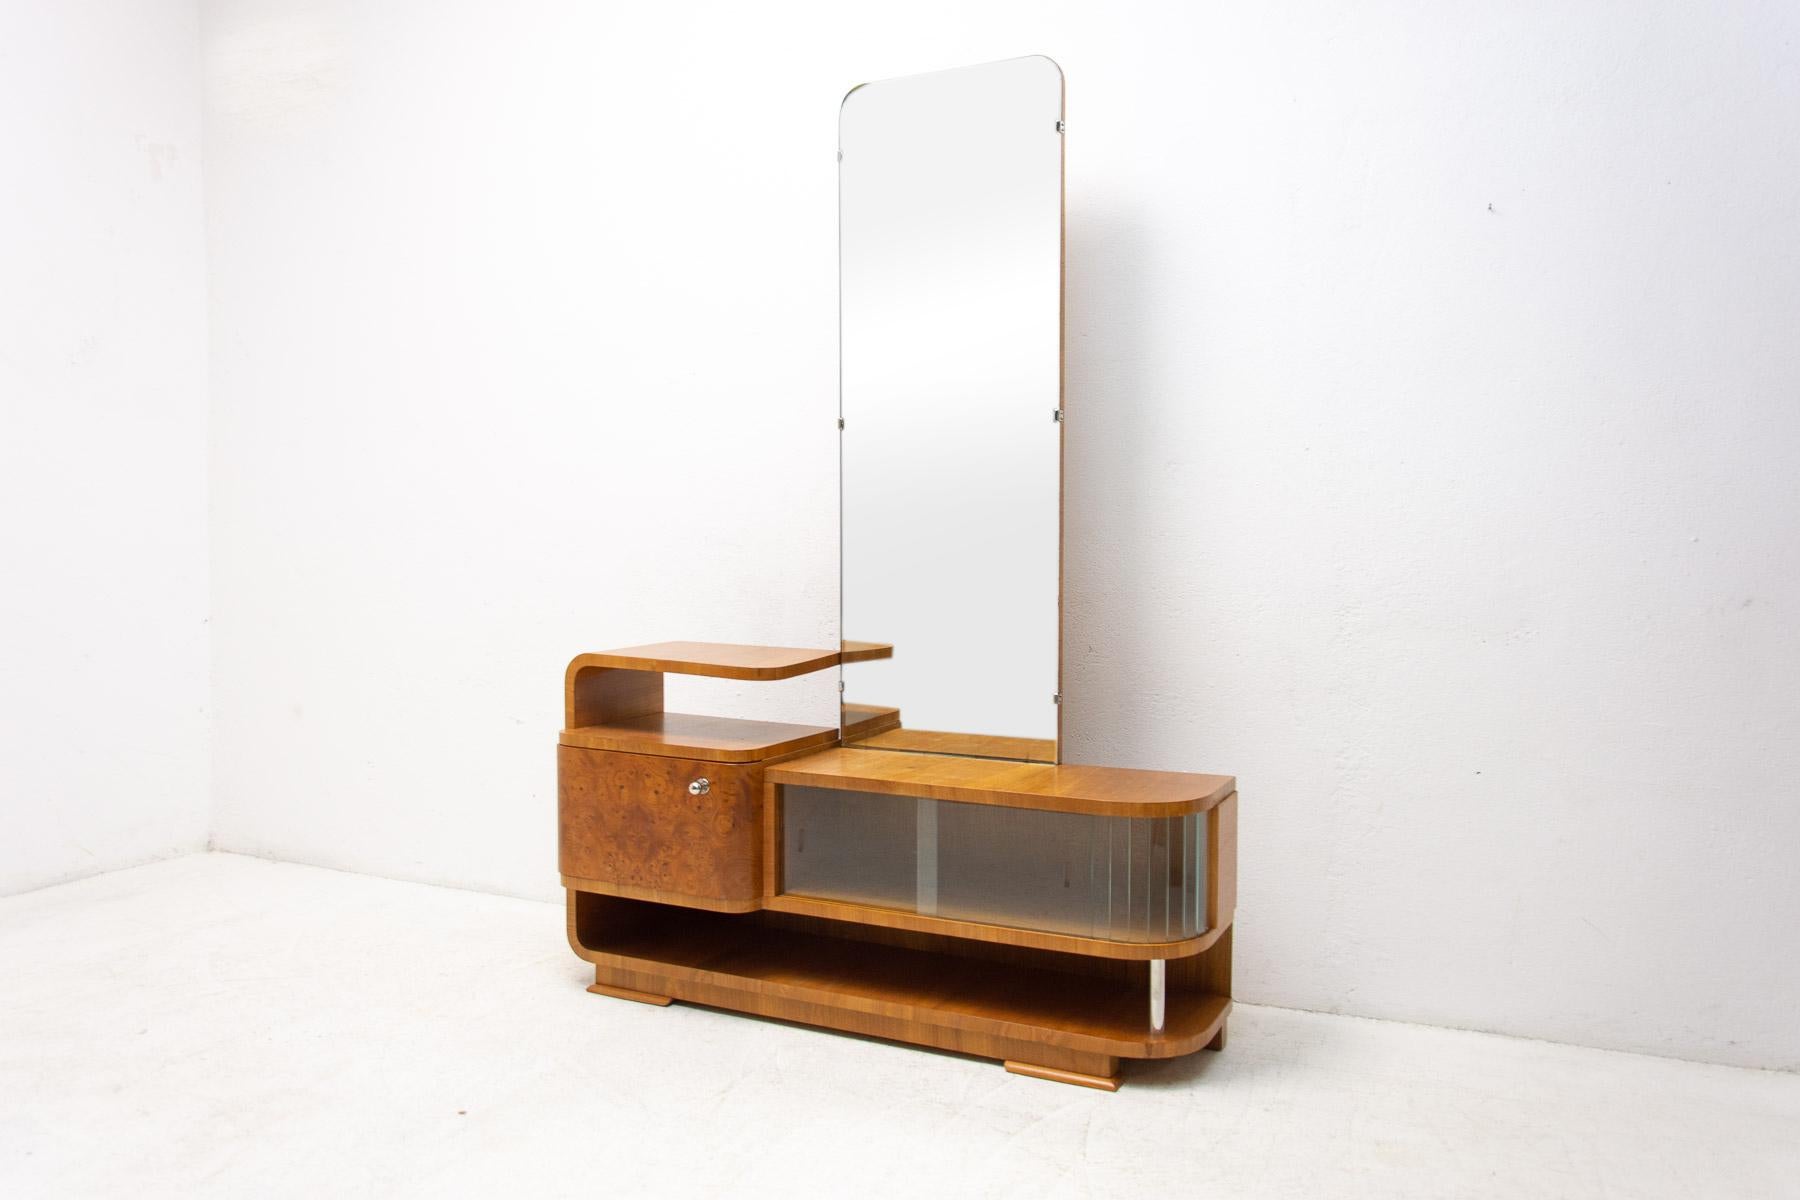 Art Deco Vanity/dressing table made in the former Czechoslovakia in the 1940s. It´s made of walnut and glass. It was fully renovated so it´s in excellent condition.

Measures: Height: 178 cm Width: 126 cm Depth: 36 cm.